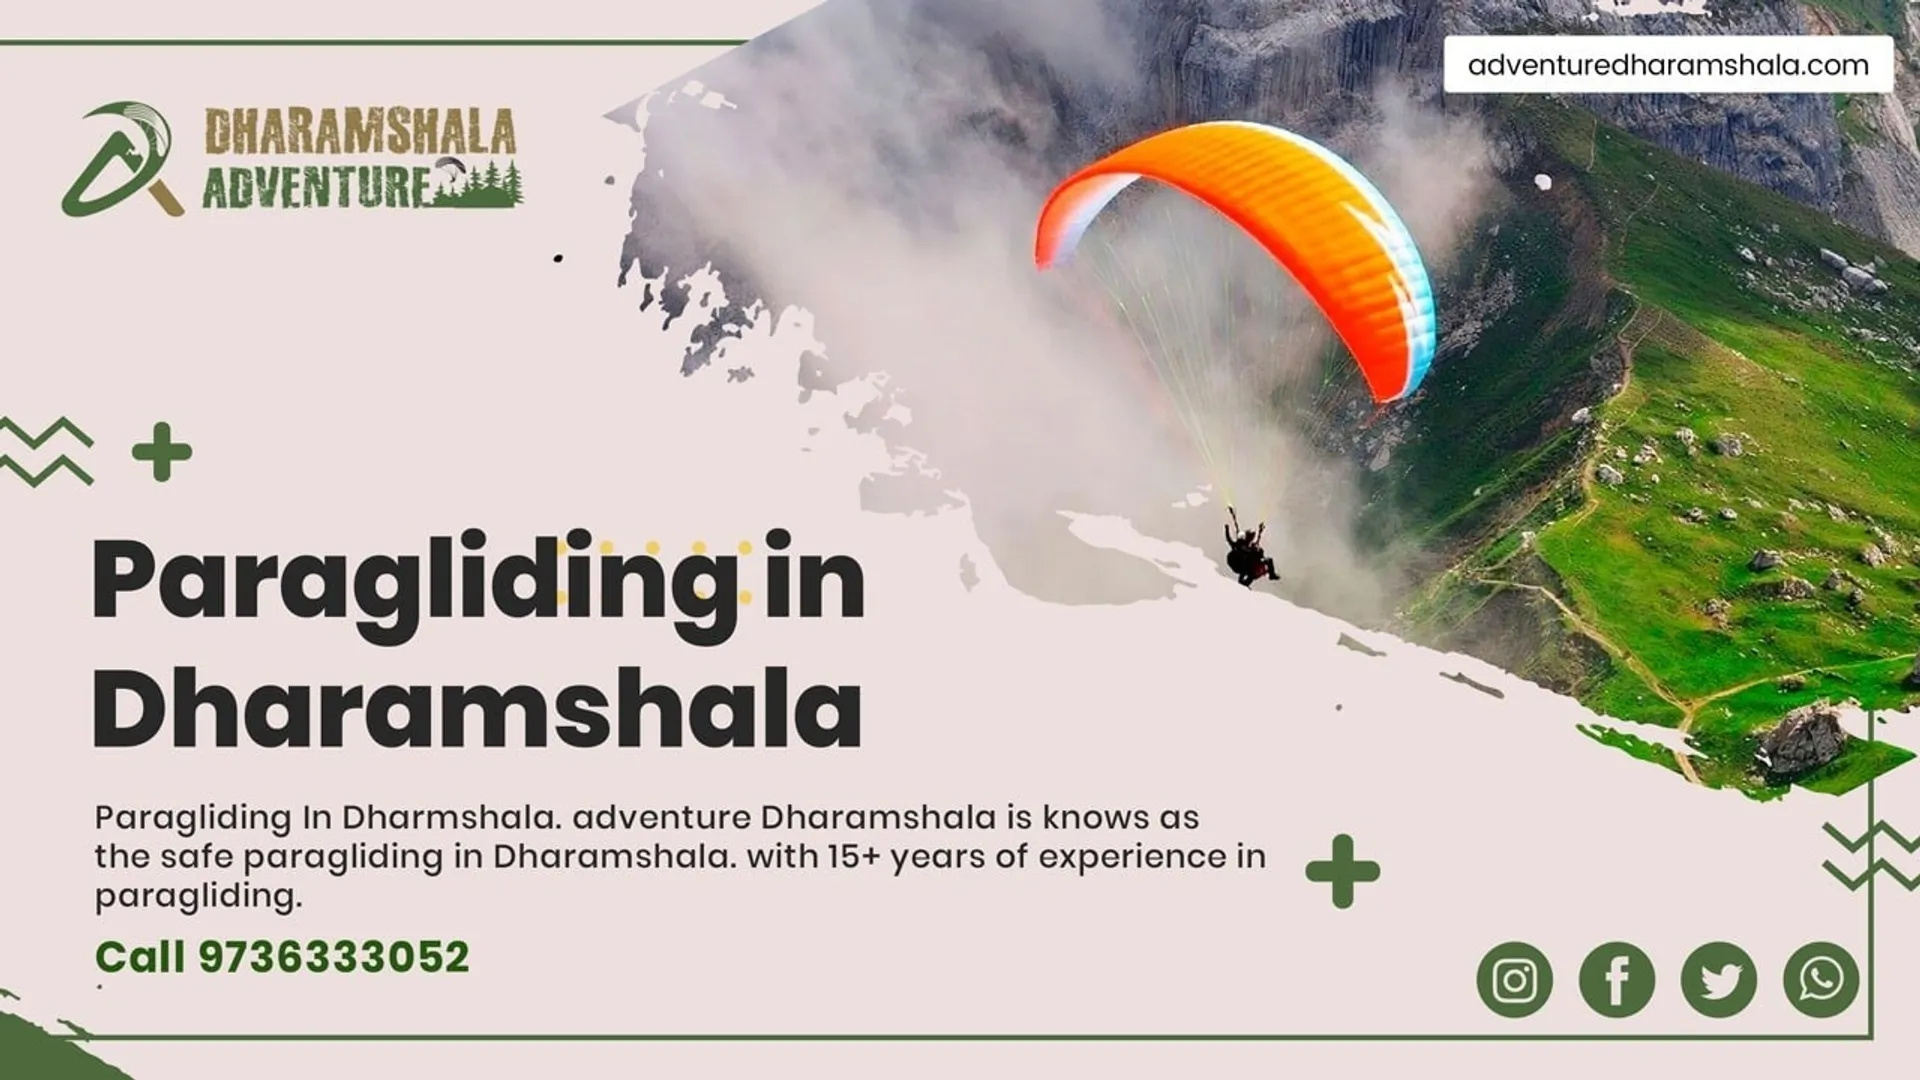 Soar to new heights with Adventure Dharamshala's exhilarating paragliding in Dharamshala! Experience the thrill of gliding above the picturesque landscapes of Himachal Pradesh. Our expert instructors ensure safety and guide you through this breathtaking adventure. Whether you're an adrenaline junkie or a nature enthusiast, paragliding in Dharamshala is an unforgettable experience with Adventure Dharamshala. https://g.co/kgs/2SvmF4